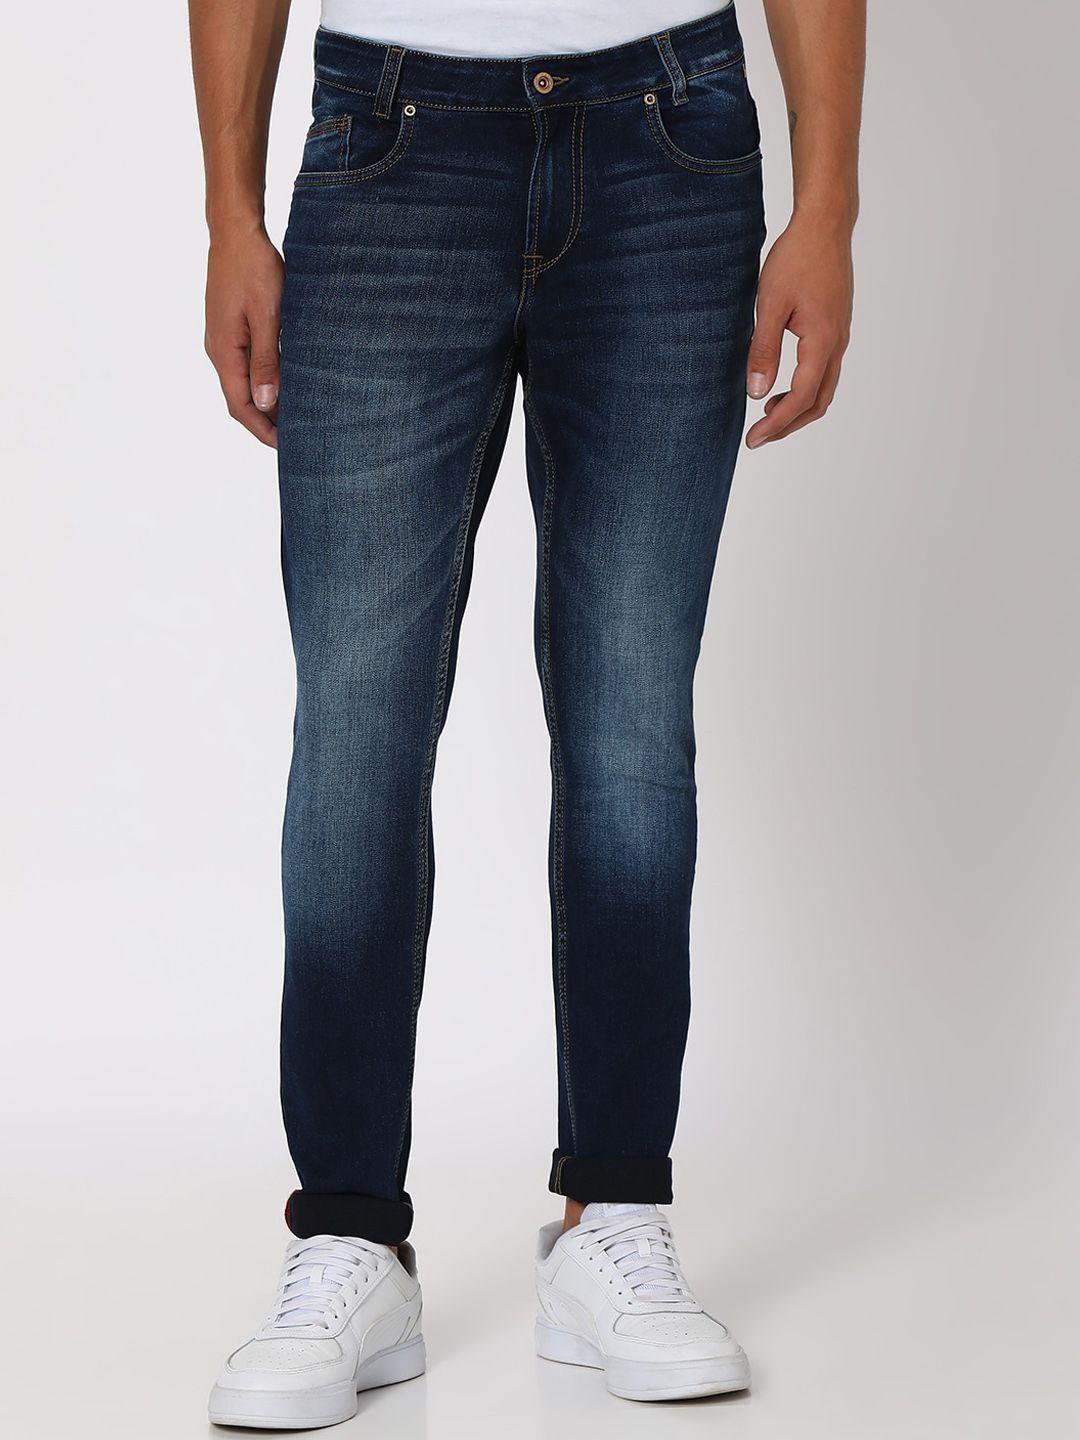 mufti-men-mid-rise-light-fade-skinny-fit-stretchable-jeans